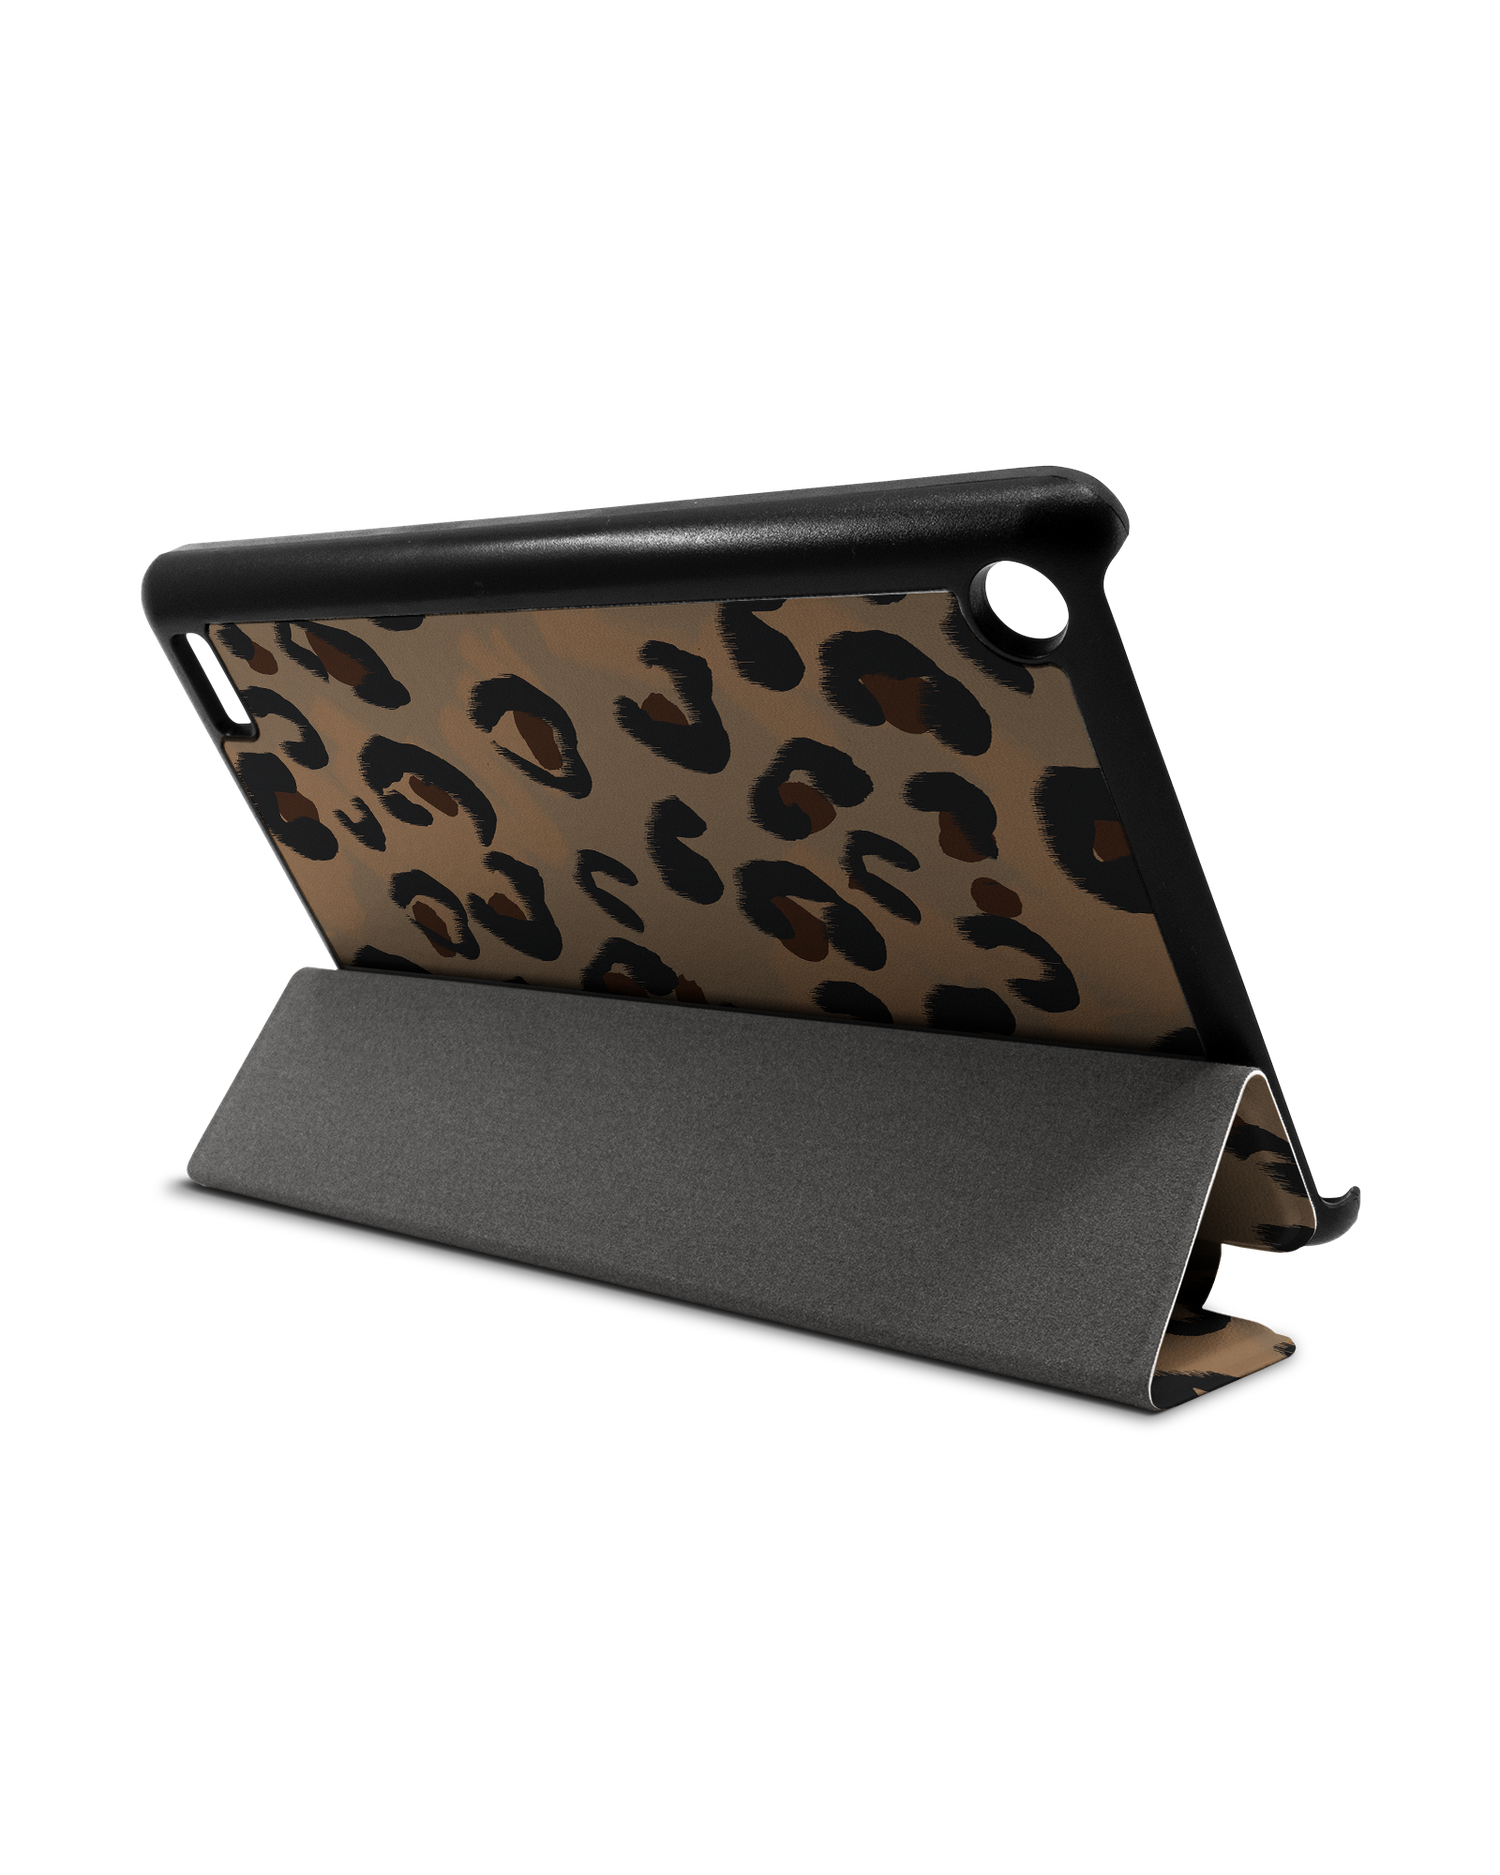 Leopard Repeat Tablet Smart Case for Amazon Fire 7: Used as Stand